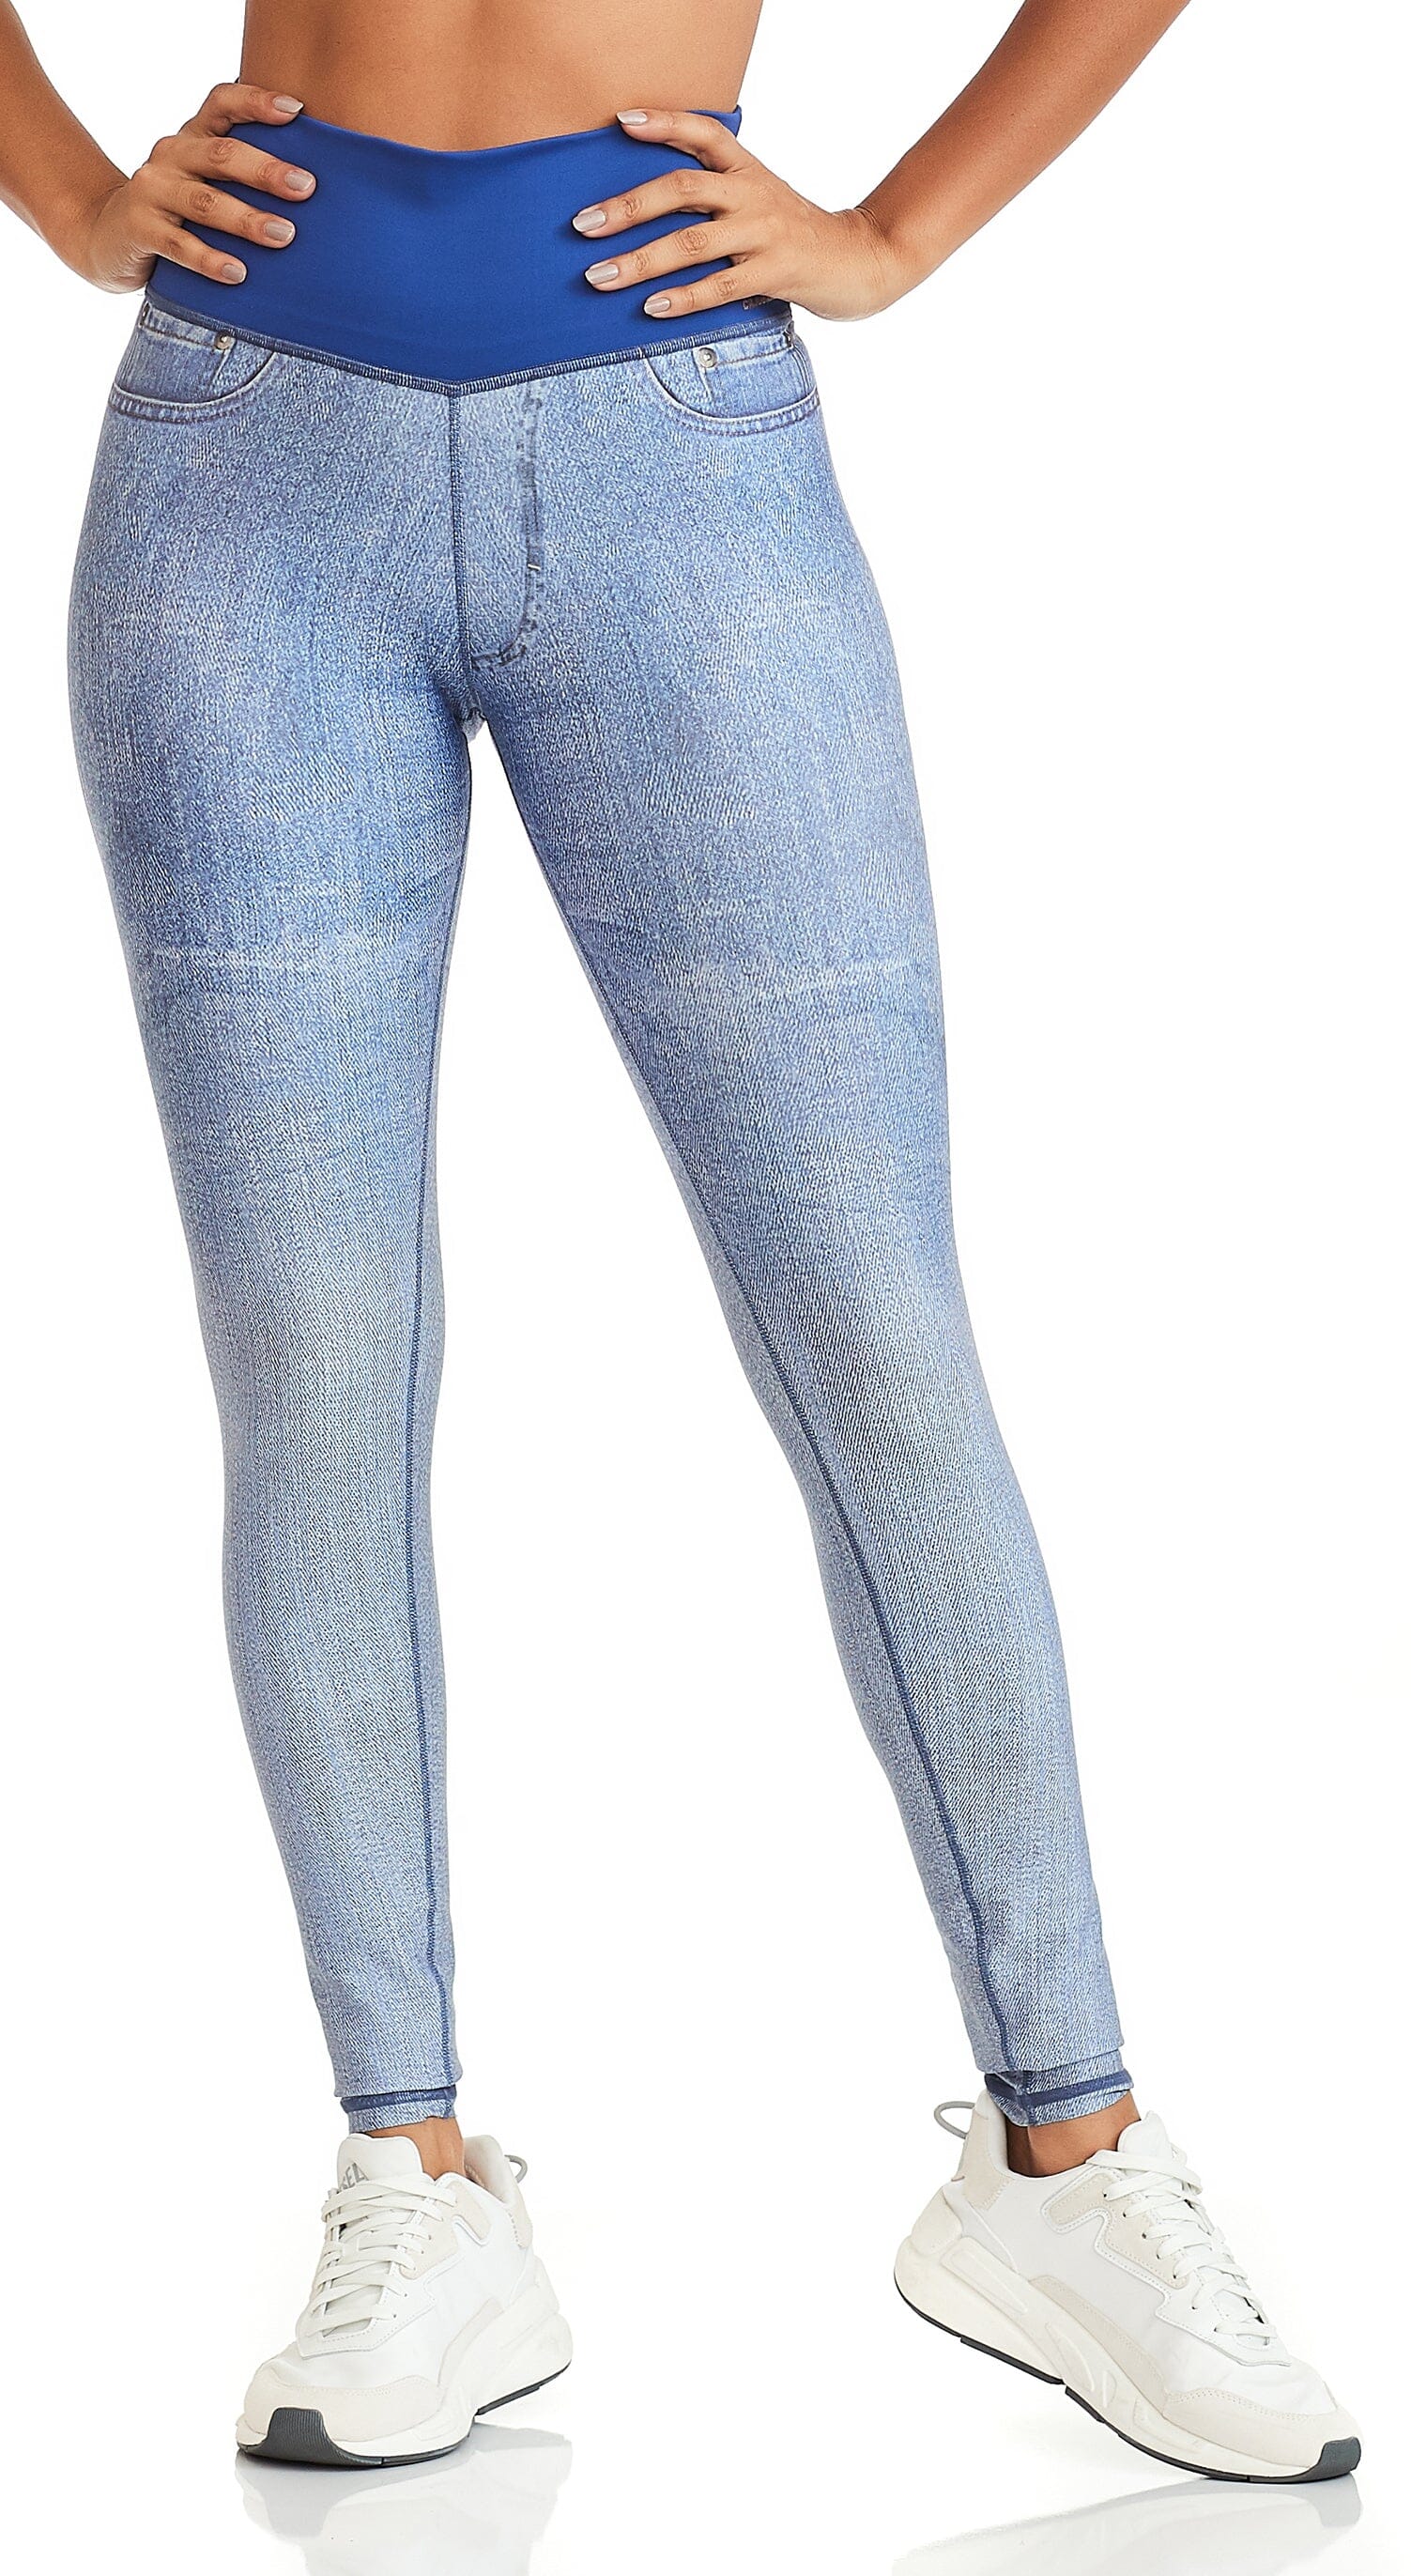 Women Anti Cellulite High Waisted Workout Leggings,Mesh Seamless Butt Lift  Yoga Pants/Squat Proof Fitness Tummy Control Tights,for Running Gym (Color  : Blue, Size : Small) price in Saudi Arabia